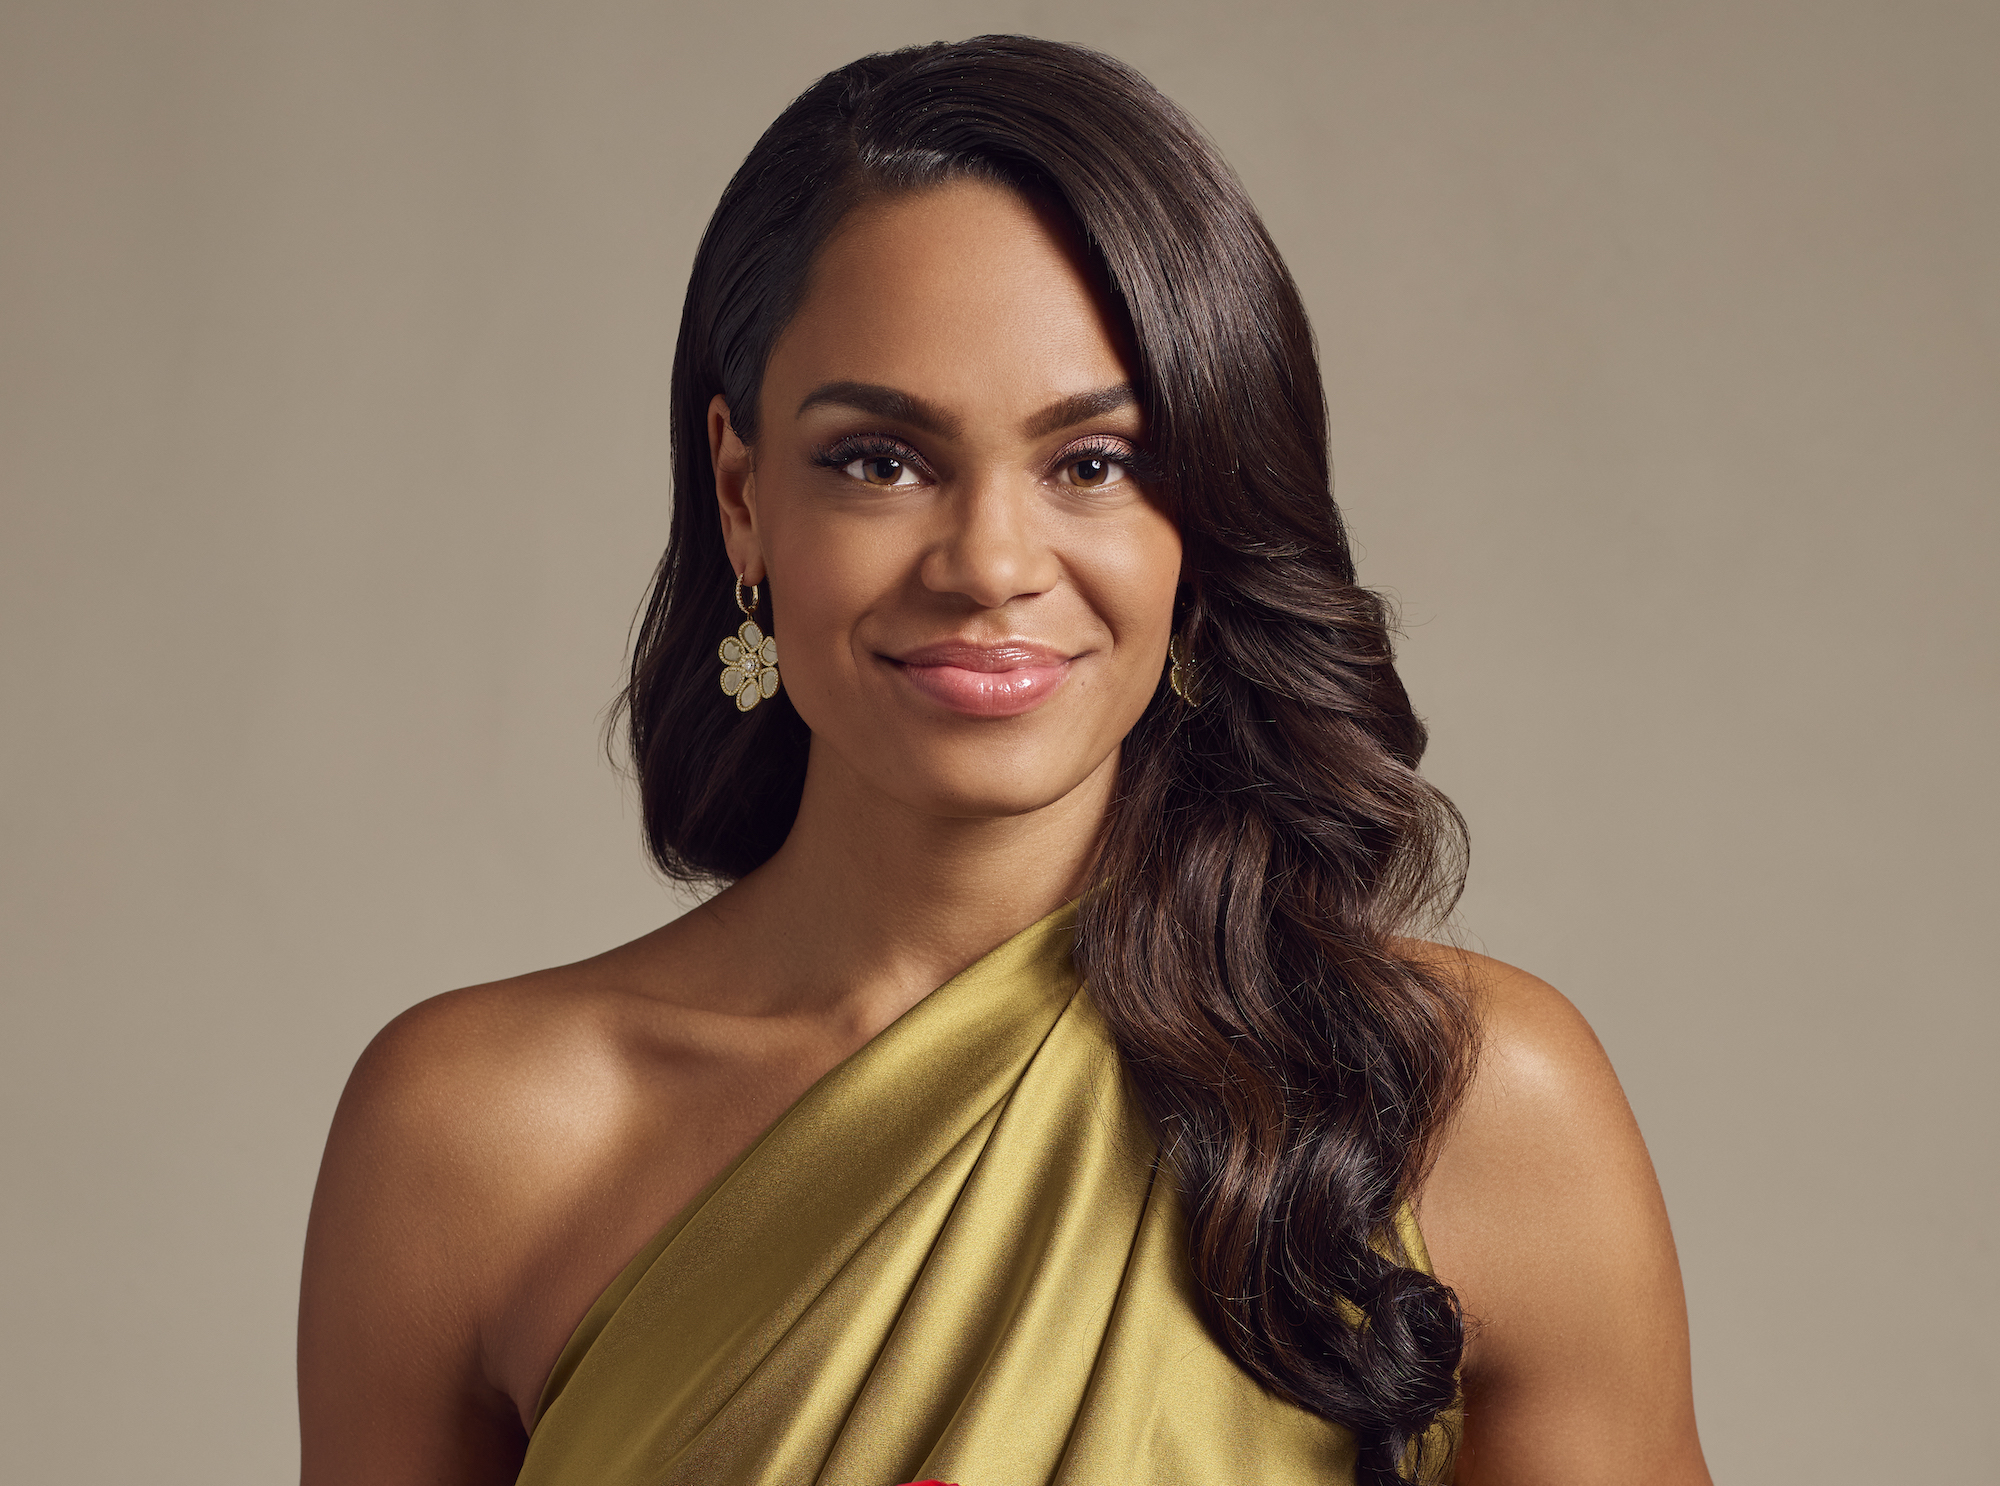 Michelle Young is the star of 'The Bachelorette' Season 18